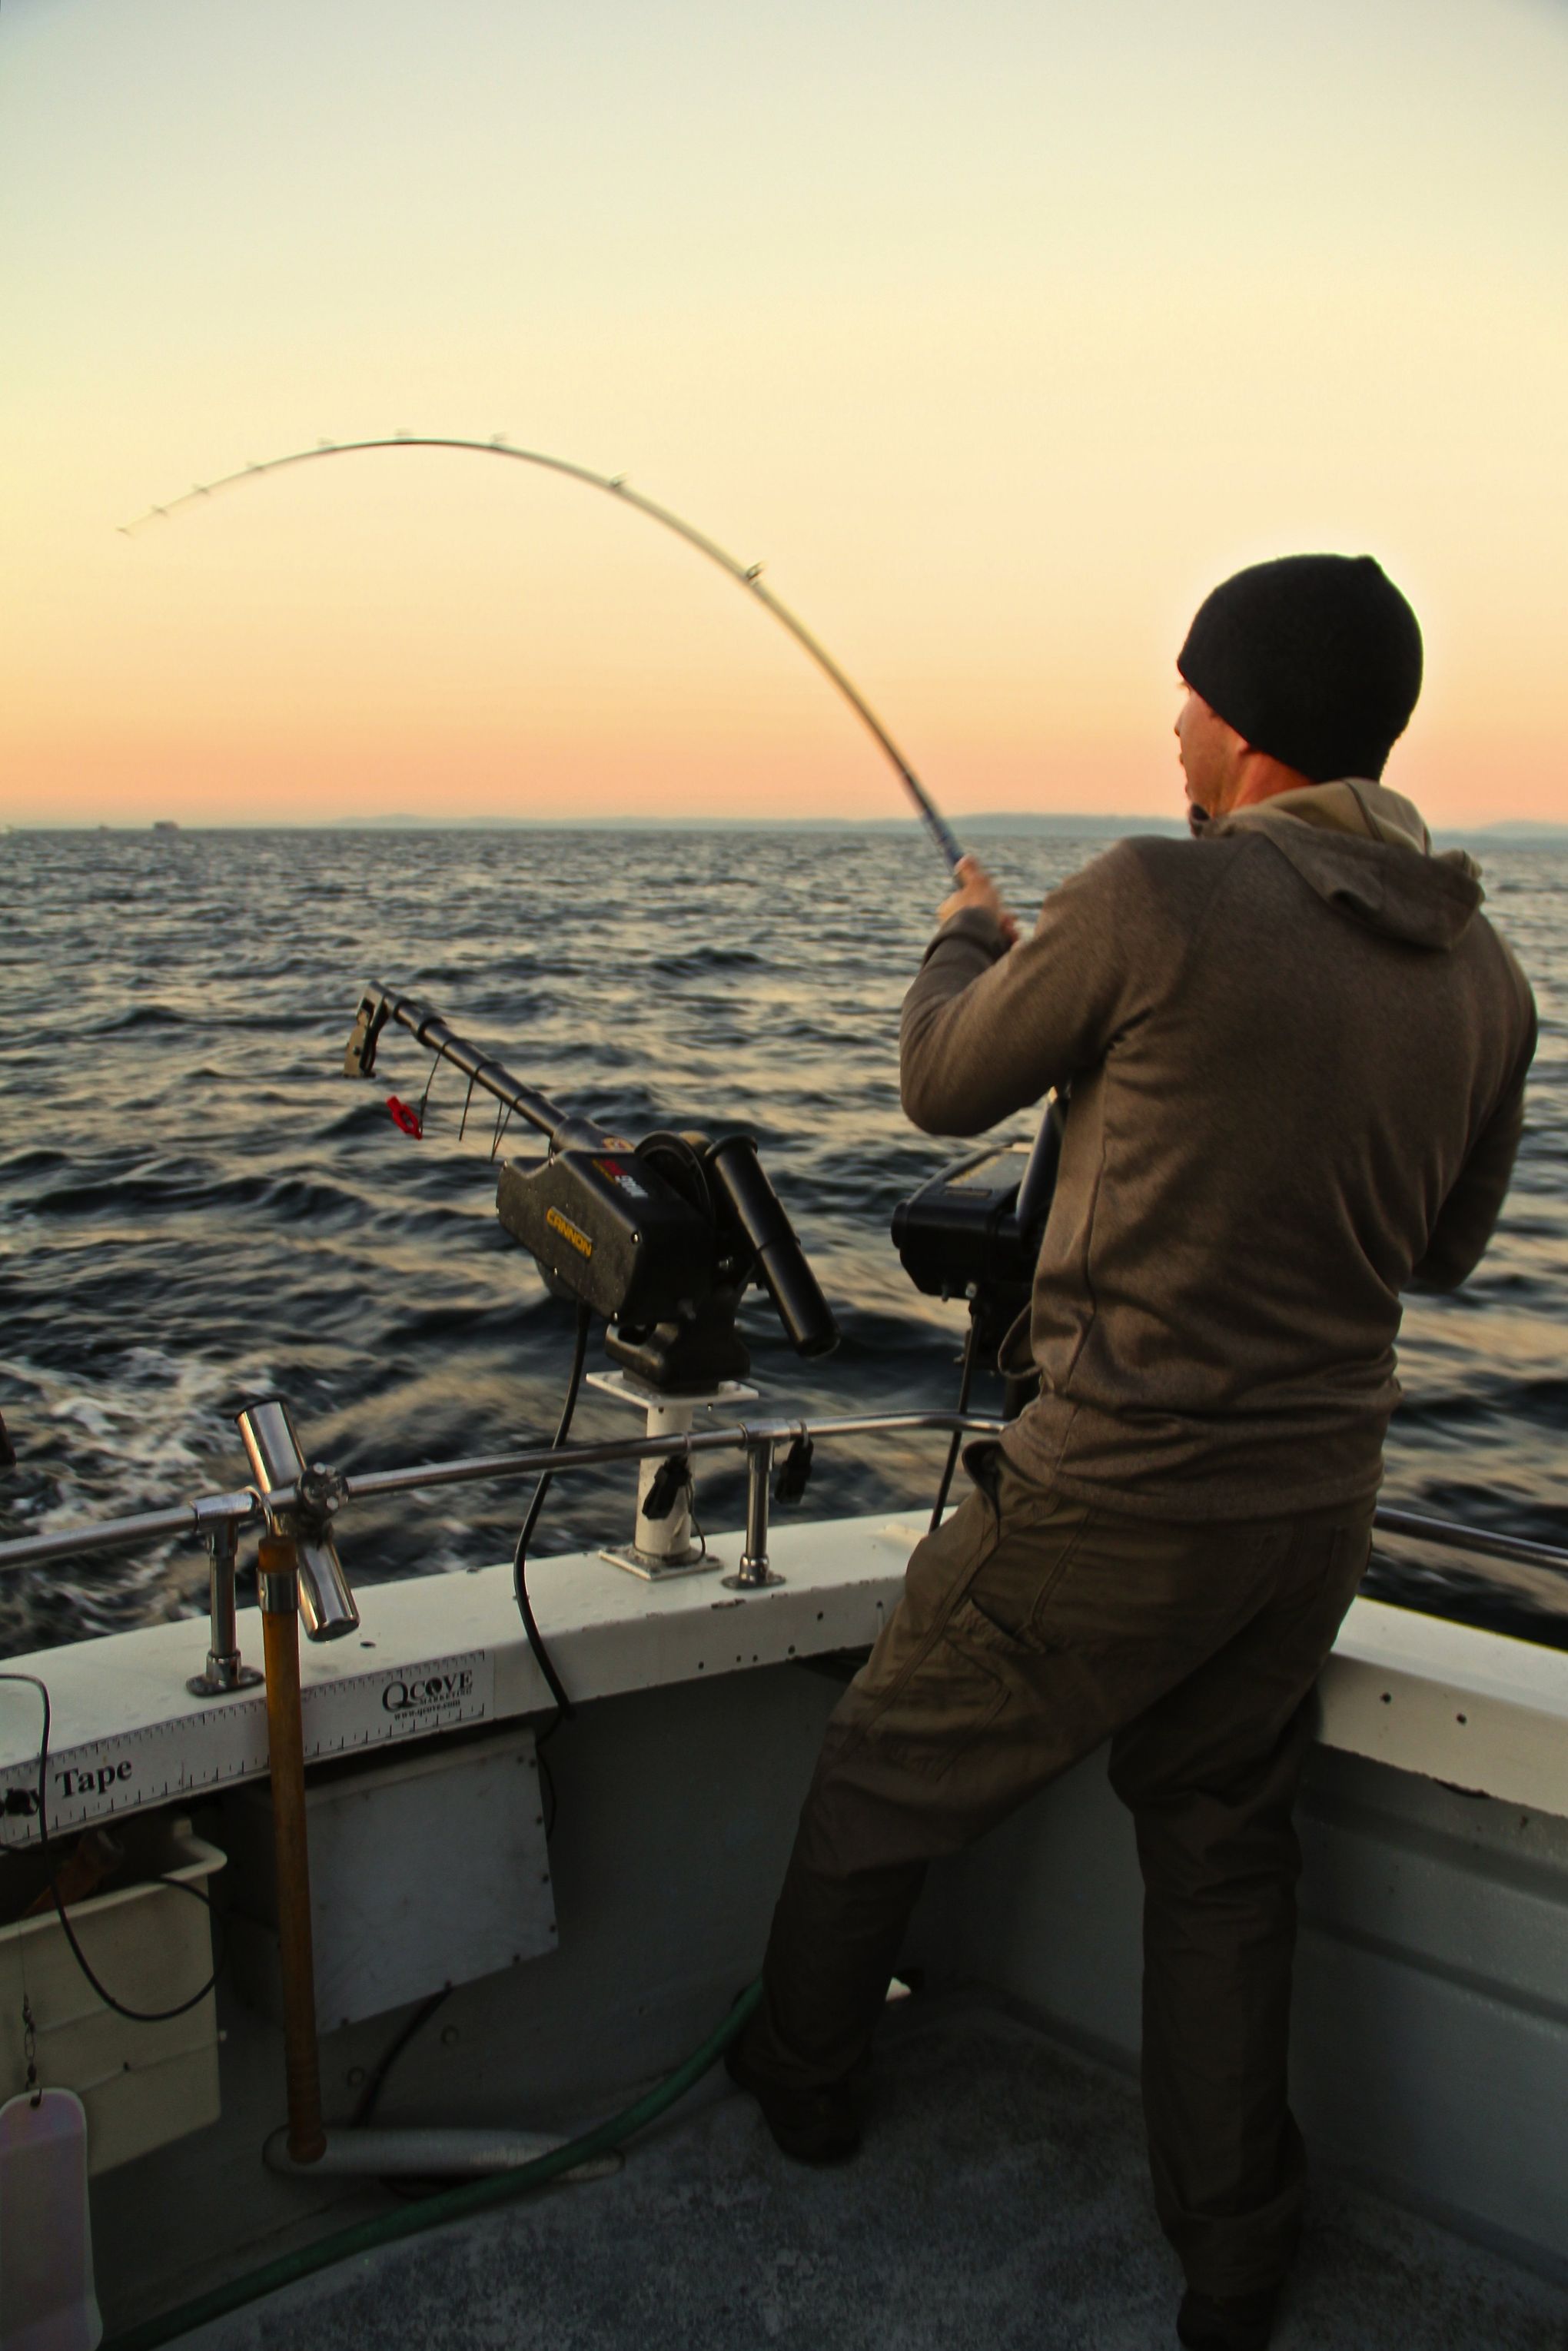 A First-Timer's Guide On How To Have The Best Time Fishing In Seattle